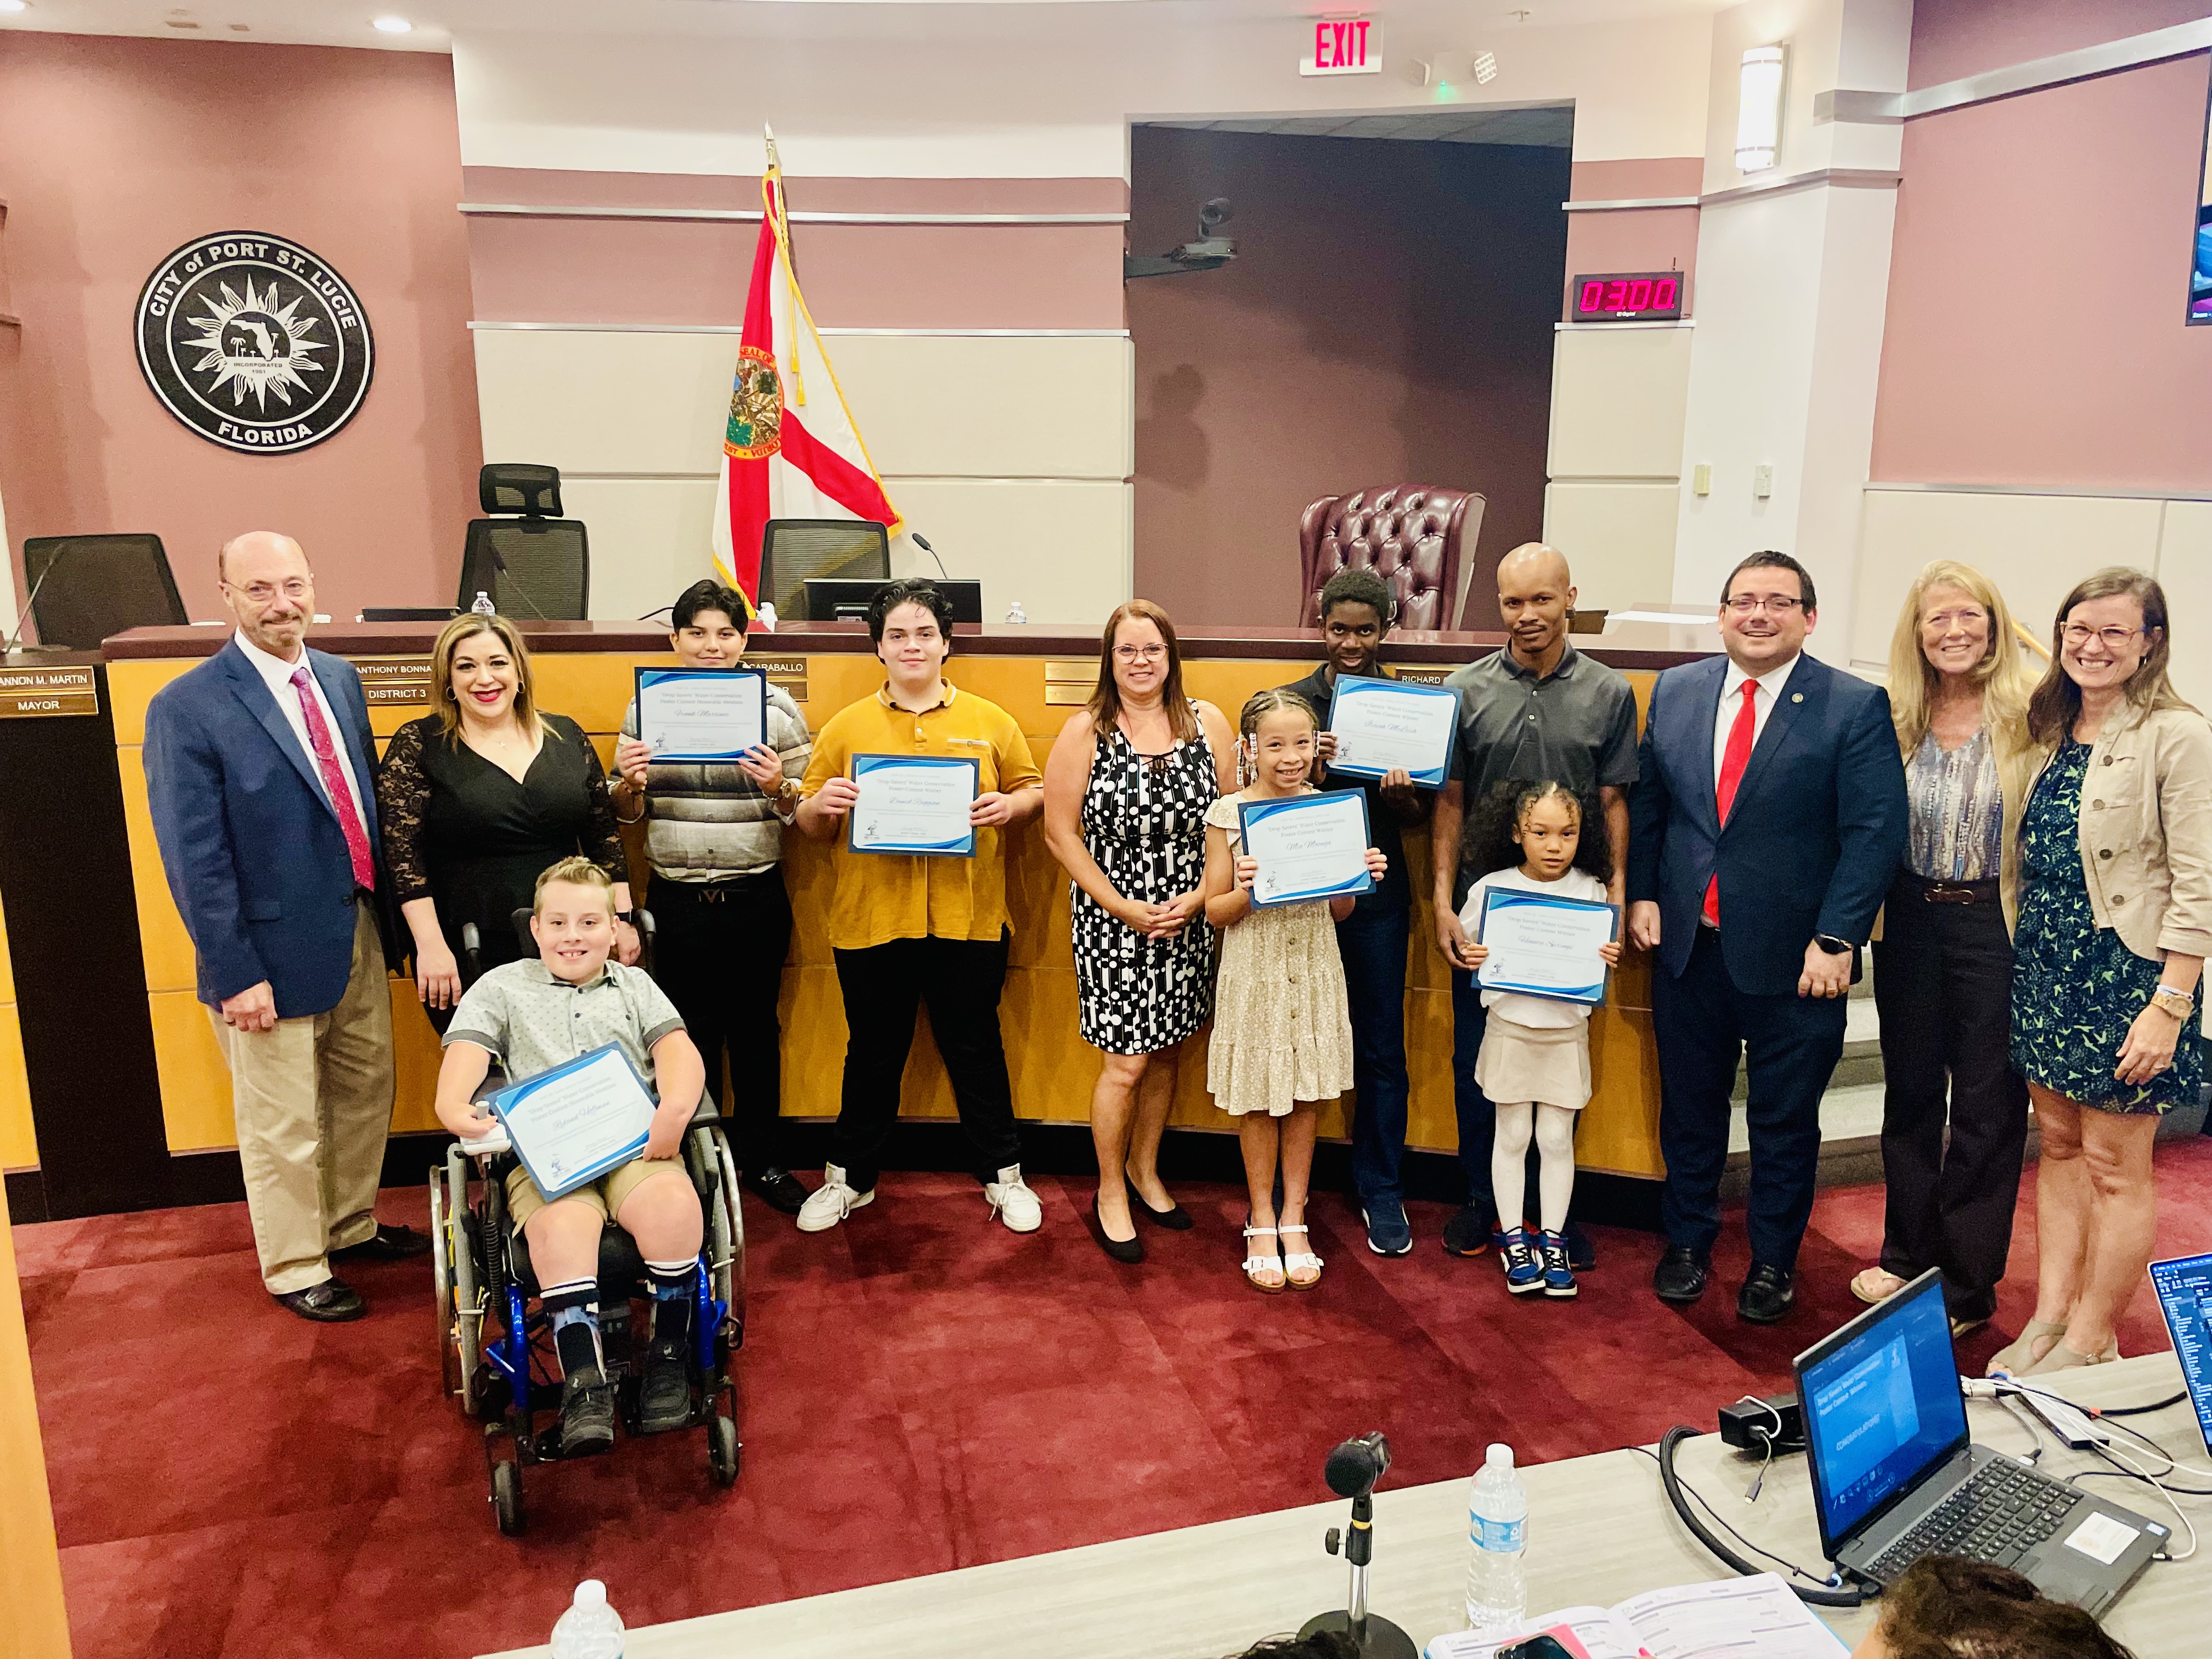 Poster winners with City Council